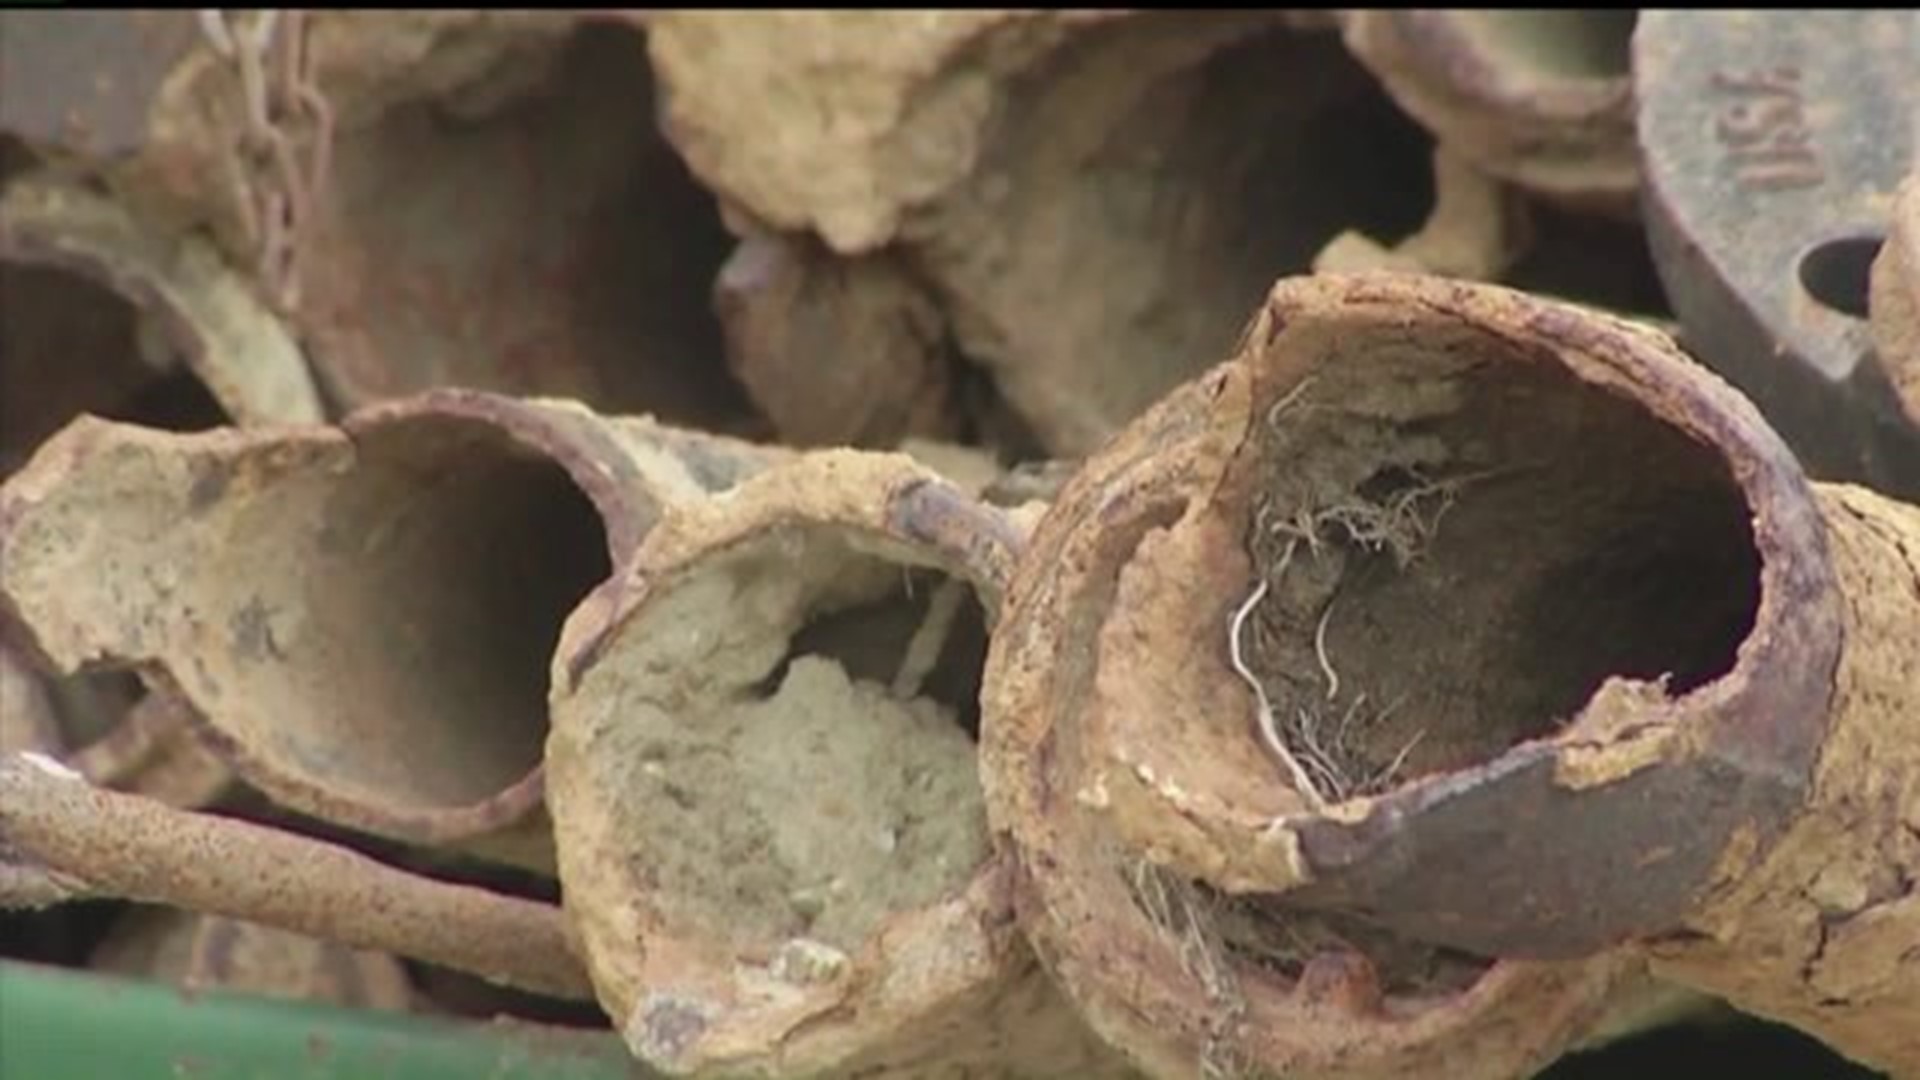 Galesburg Leaders Discuss Lead in Pipes